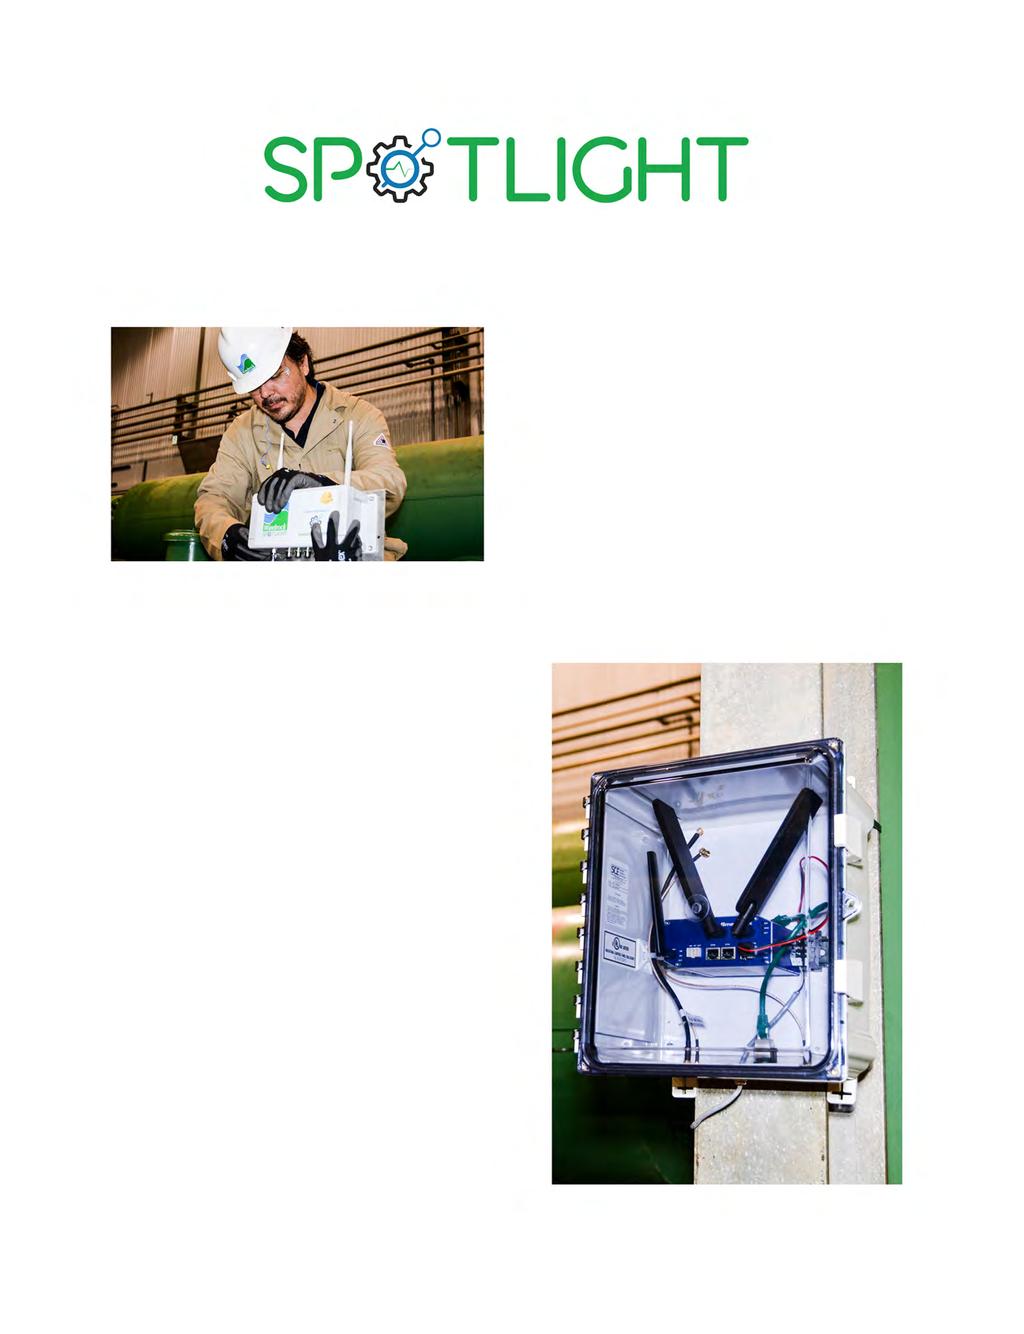 TECHNOLOGY OVERVIEW The Spotlight Monitoring System consists of four magnet-mounted PUCs (Peripheral Universal Connection) that are quickly and easily attached to the machine.